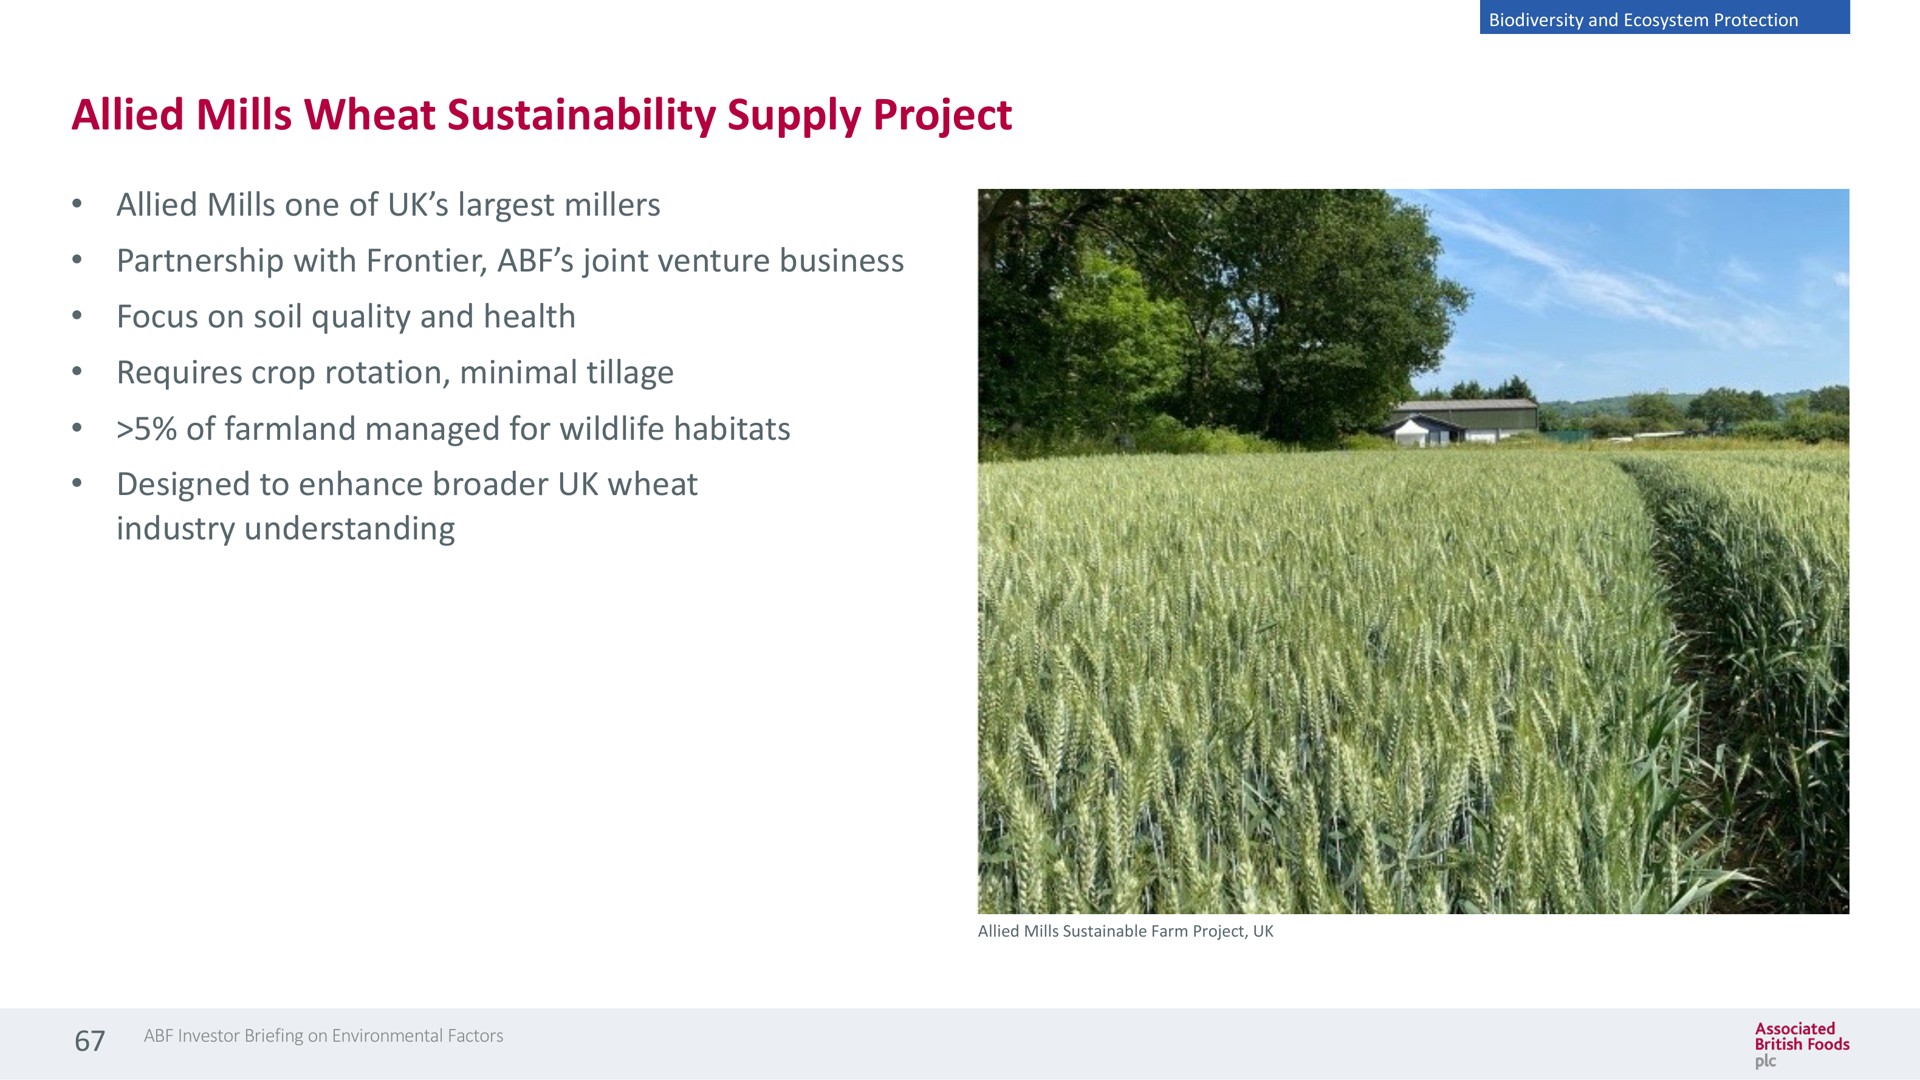 allied mills wheat supply project allied mills one of millers partnership with frontier joint venture business focus on soil quality and health requires crop rotation minimal tillage of managed for wildlife habitats designed to enhance wheat industry understanding | Associated British Foods